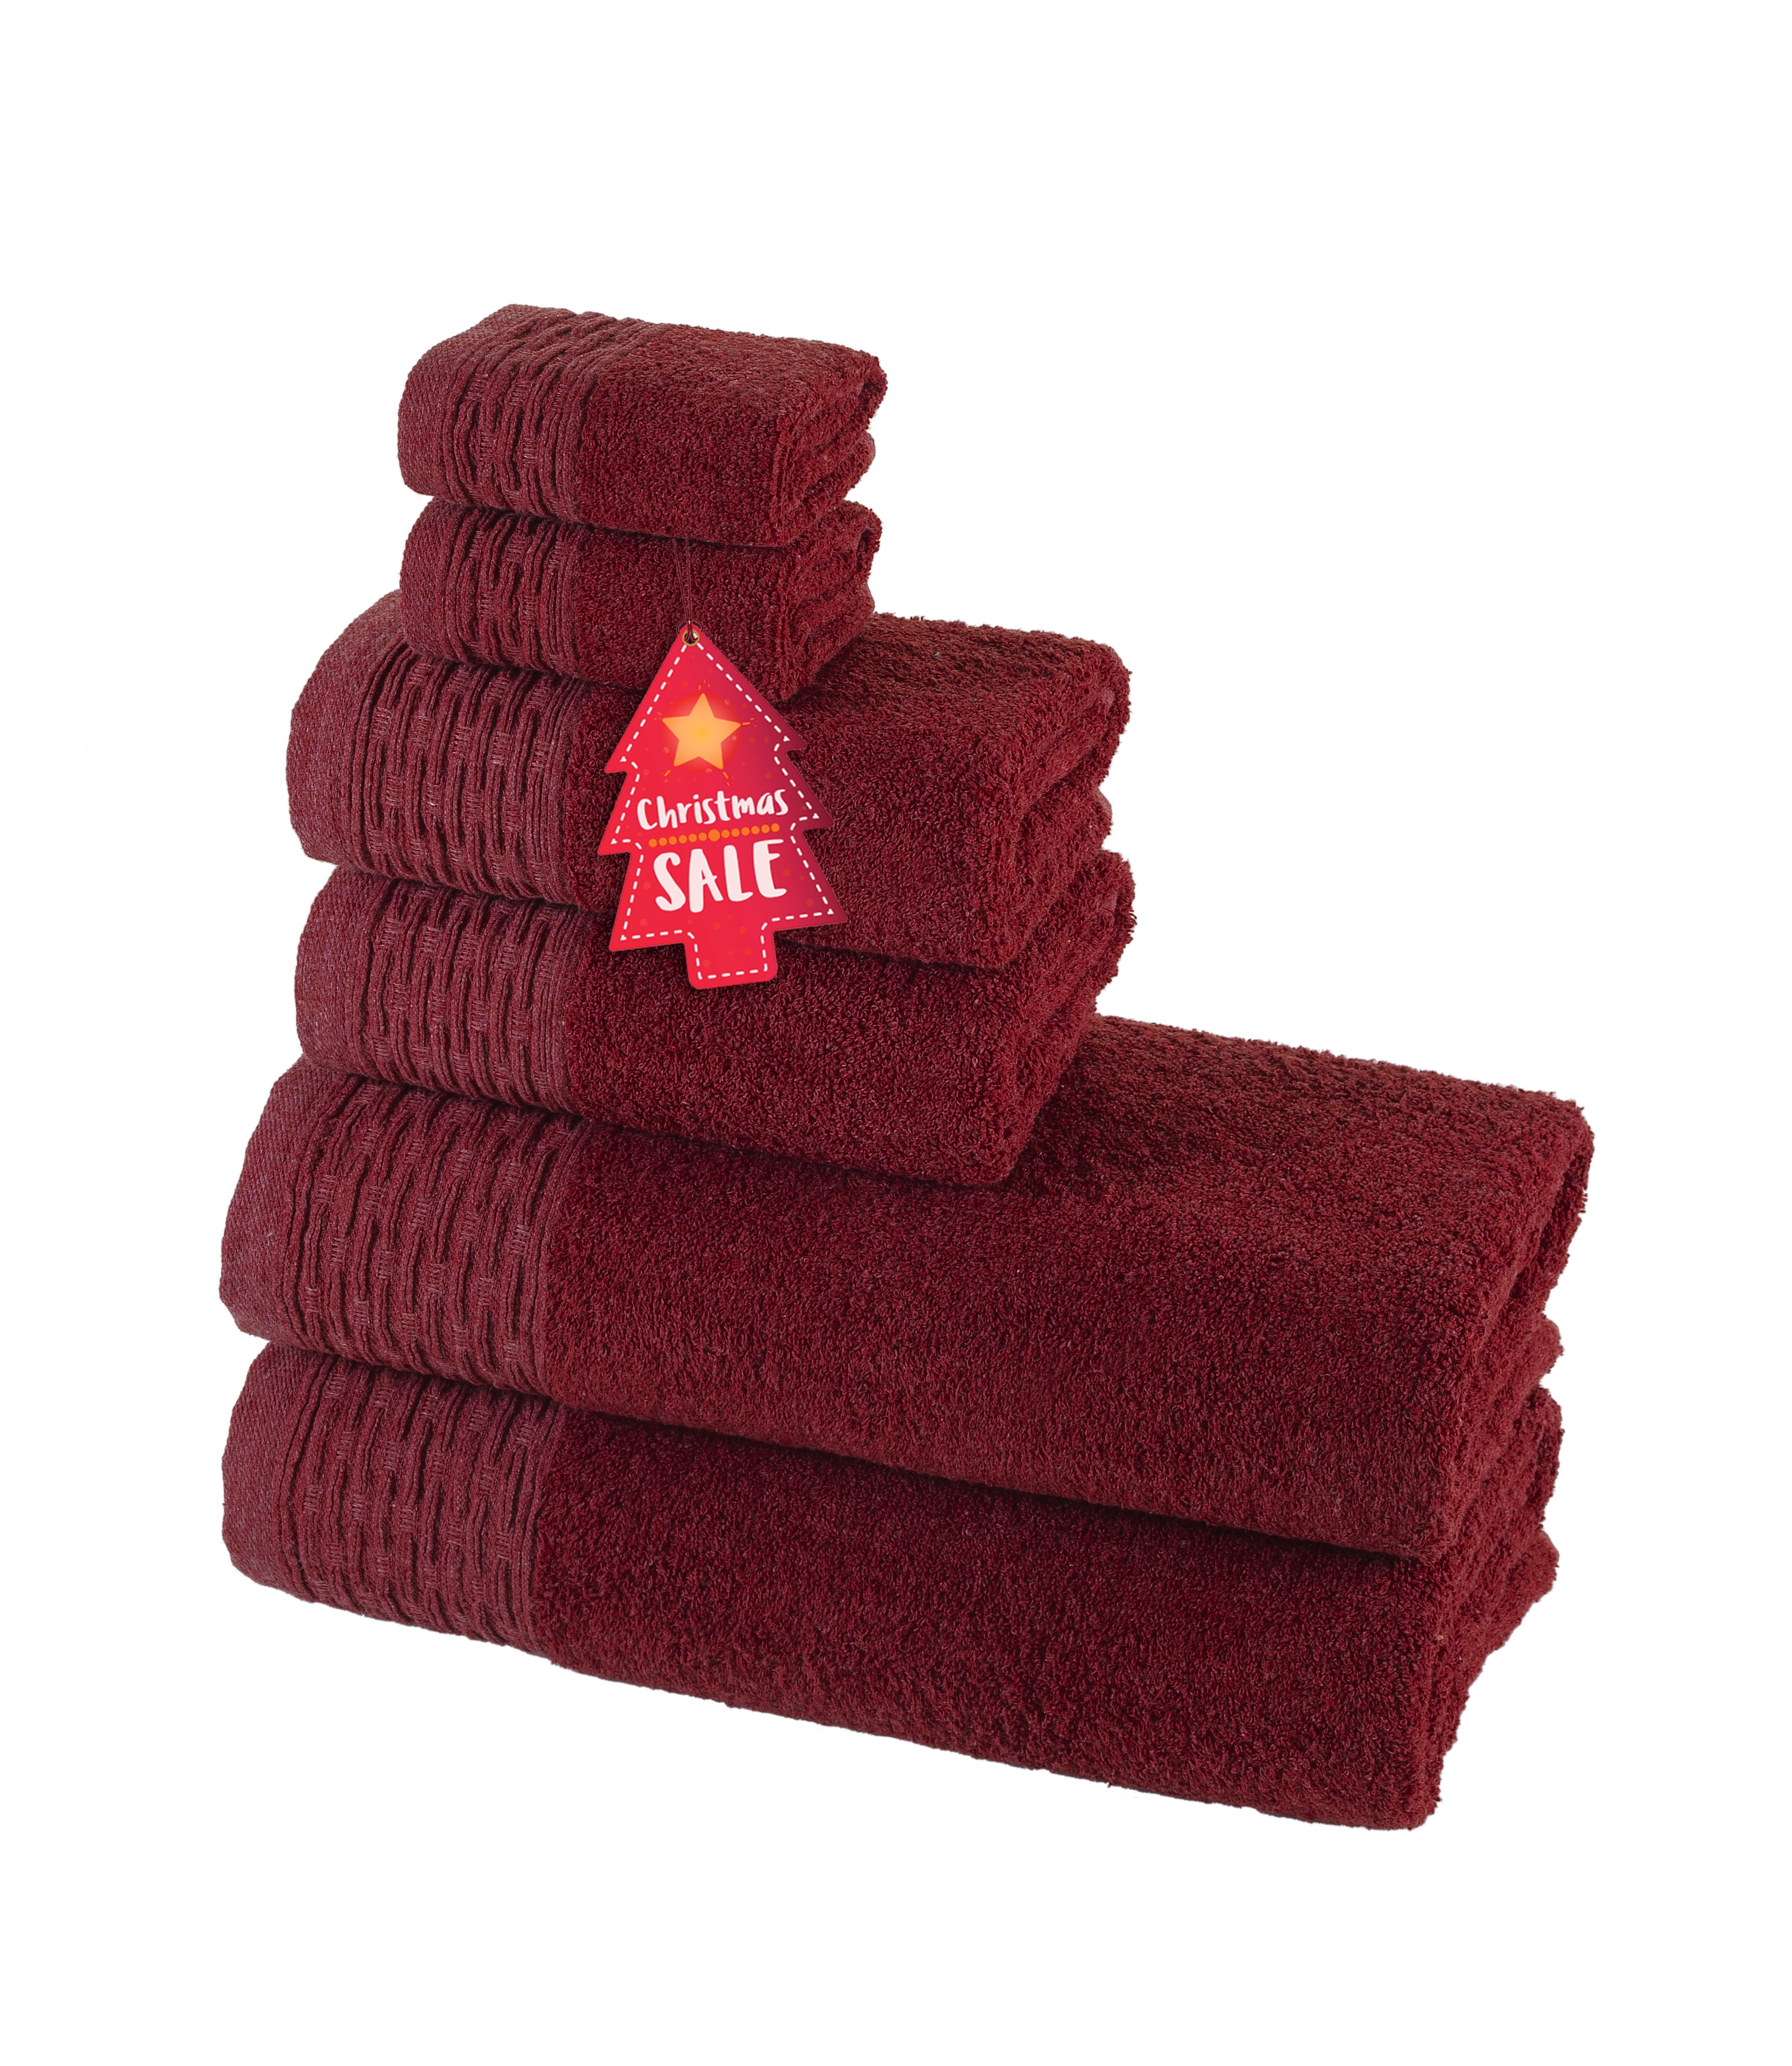 This 'Very Absorbent' 6-Piece Bath Towel Set Is on Sale at